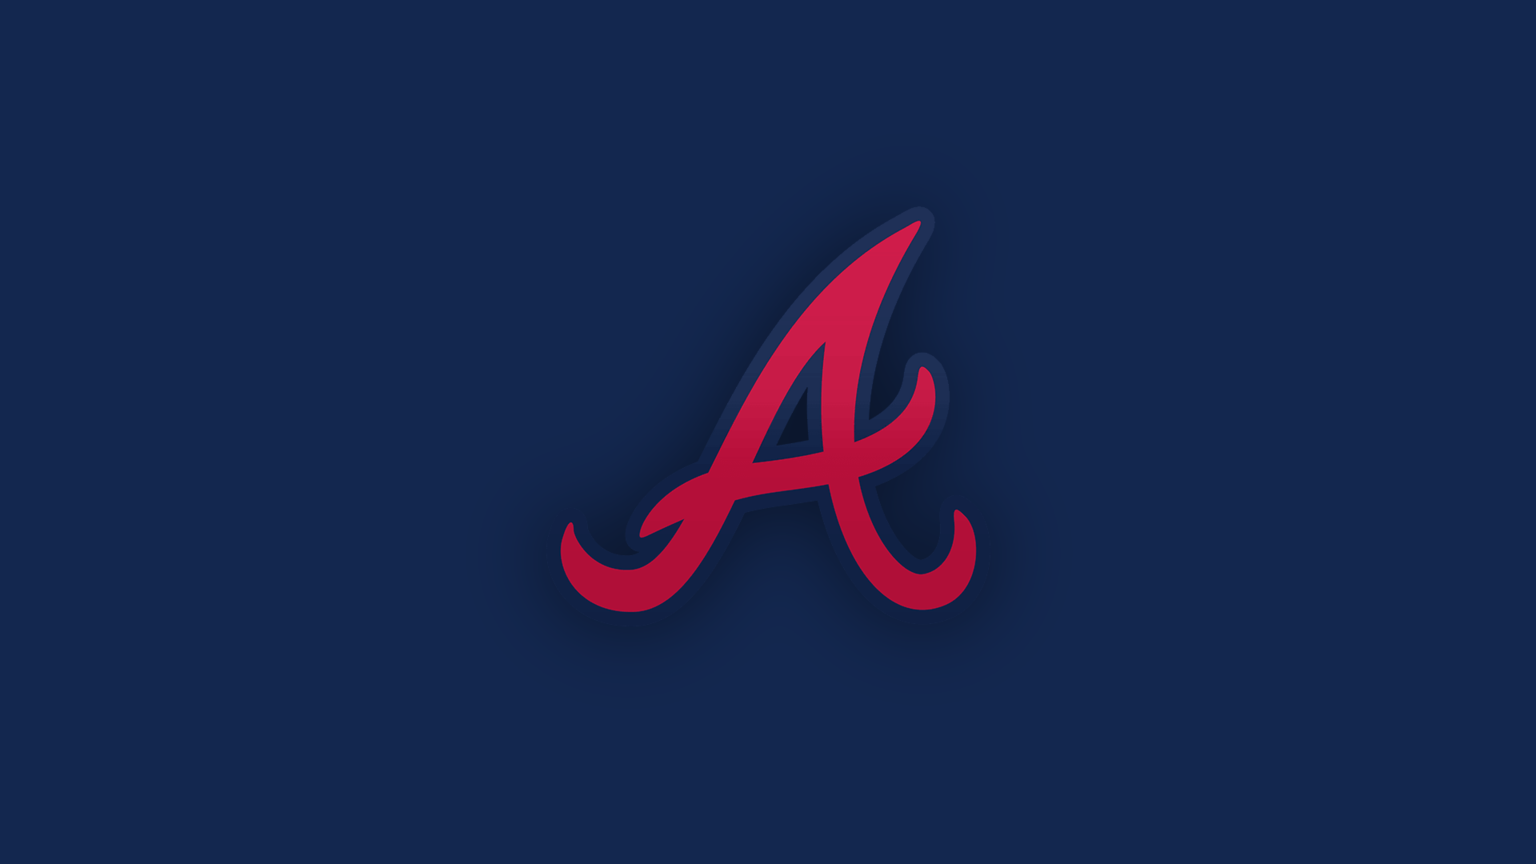 How to Watch The Atlanta Braves Live Without Cable in 2021 – The Streamable